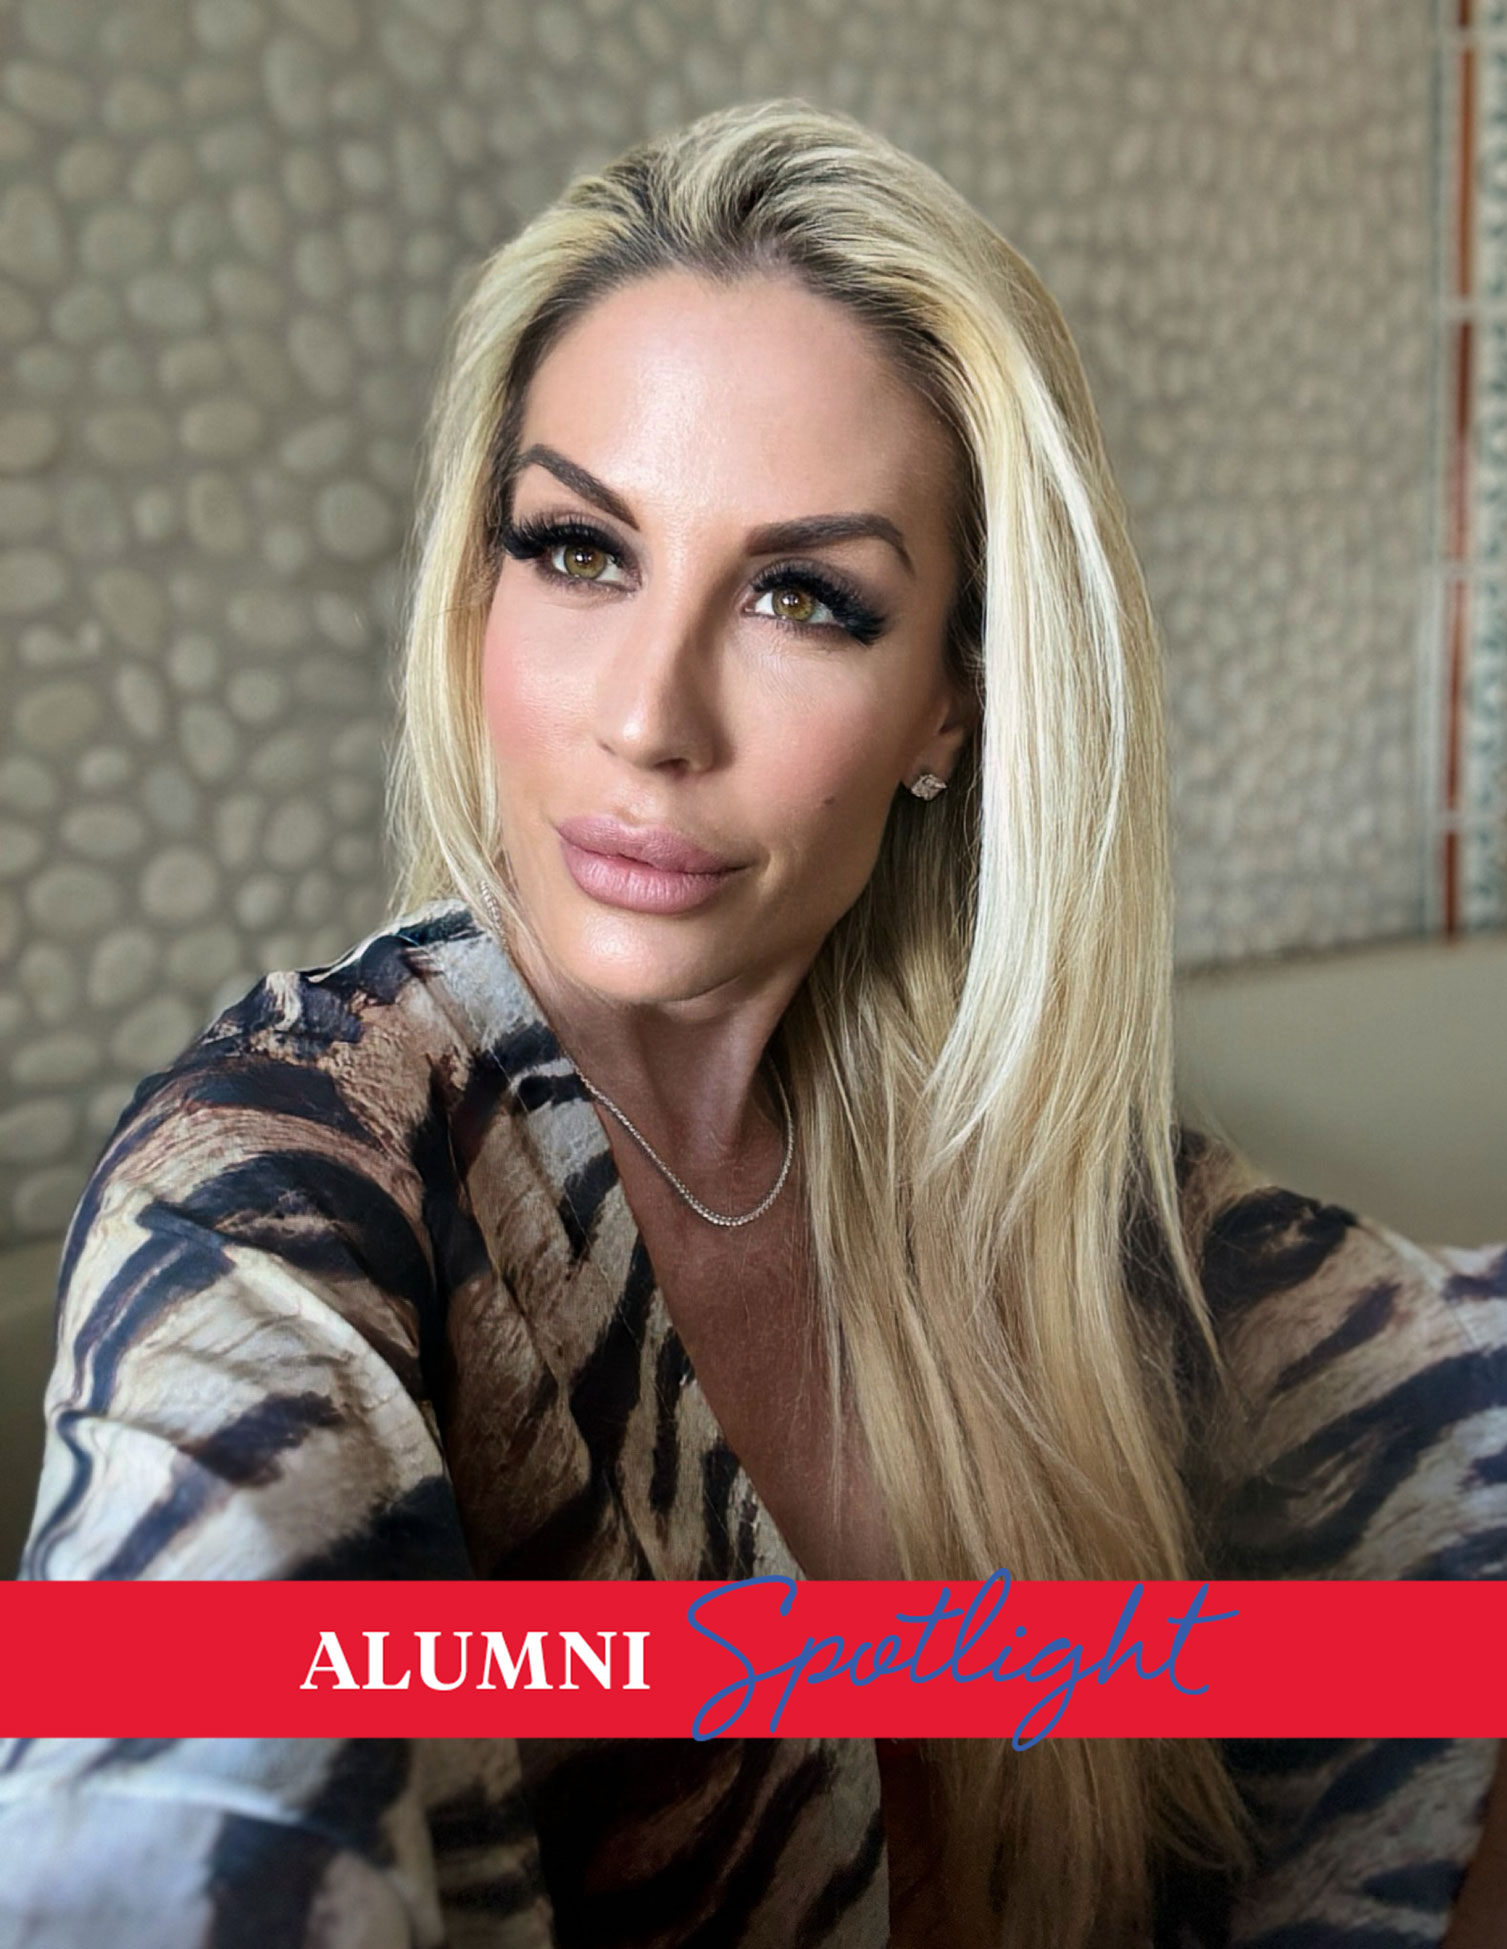 Advertising alum and entrepreneur Gina Farmer (B.A. '01) has launched businesses in the beauty, culinary, and stationery industries.